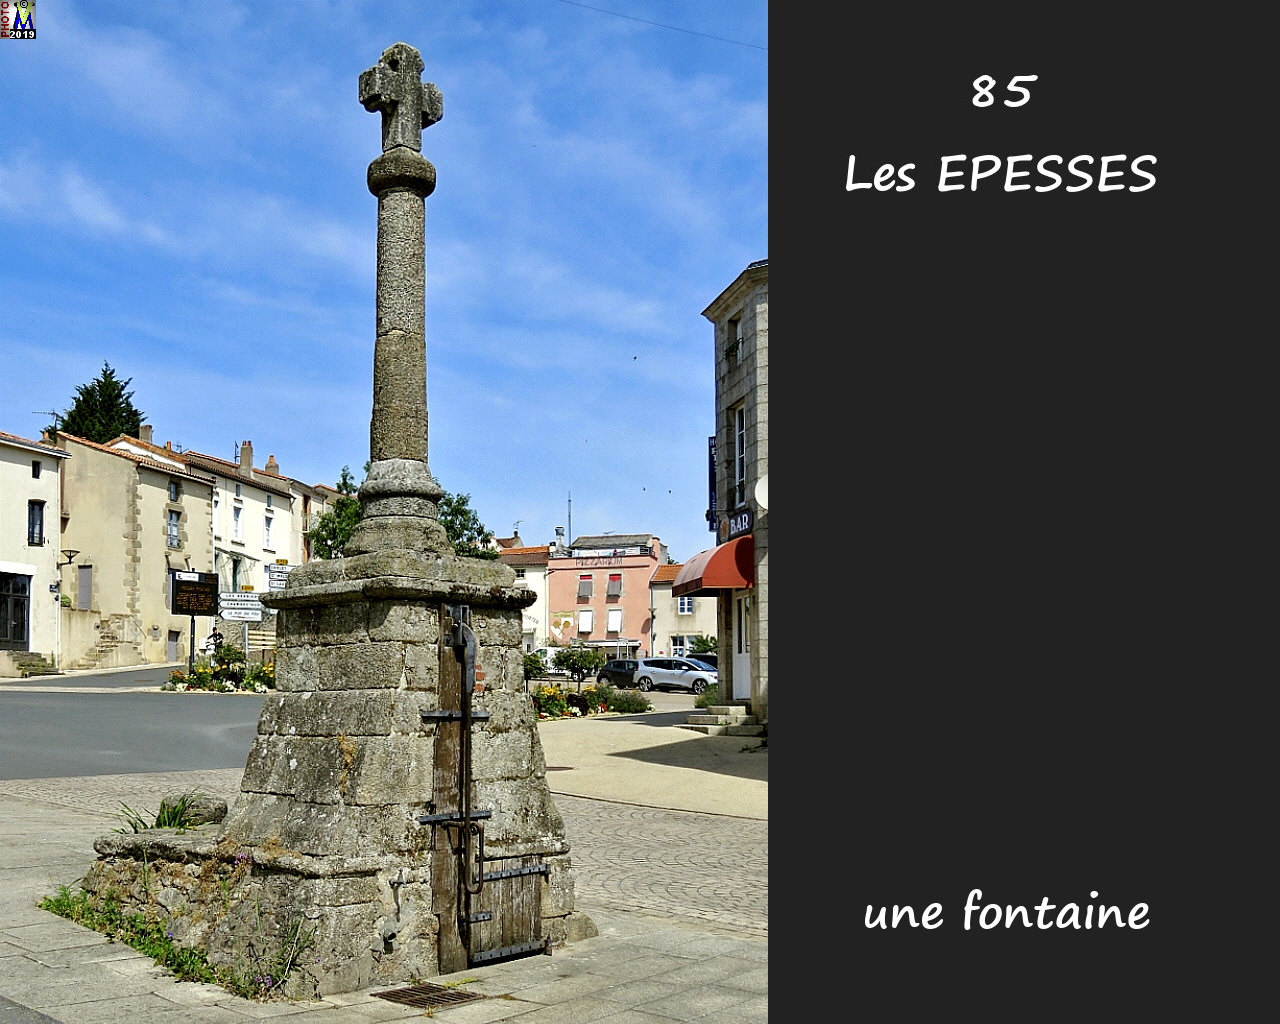 85EPESSES_fontaine_1000.jpg